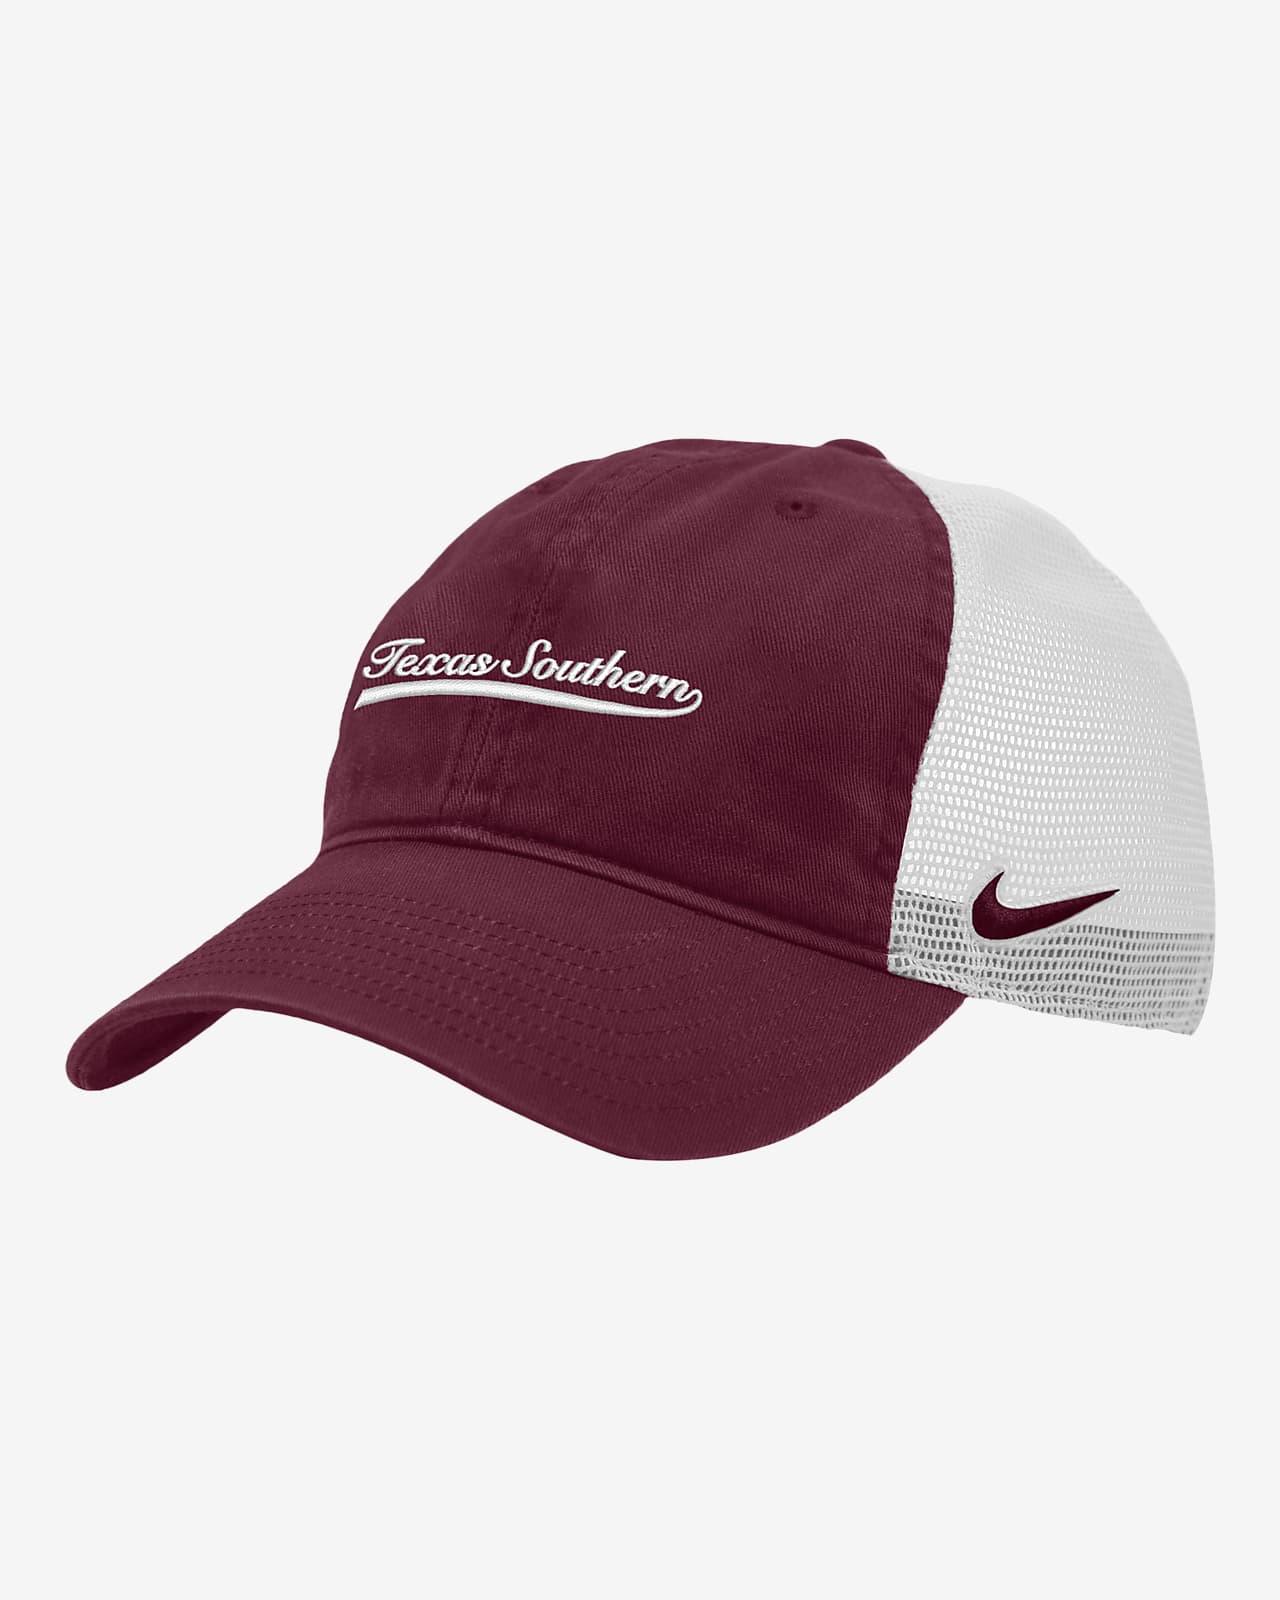 Texas Southern Heritage86 Nike College Trucker Hat